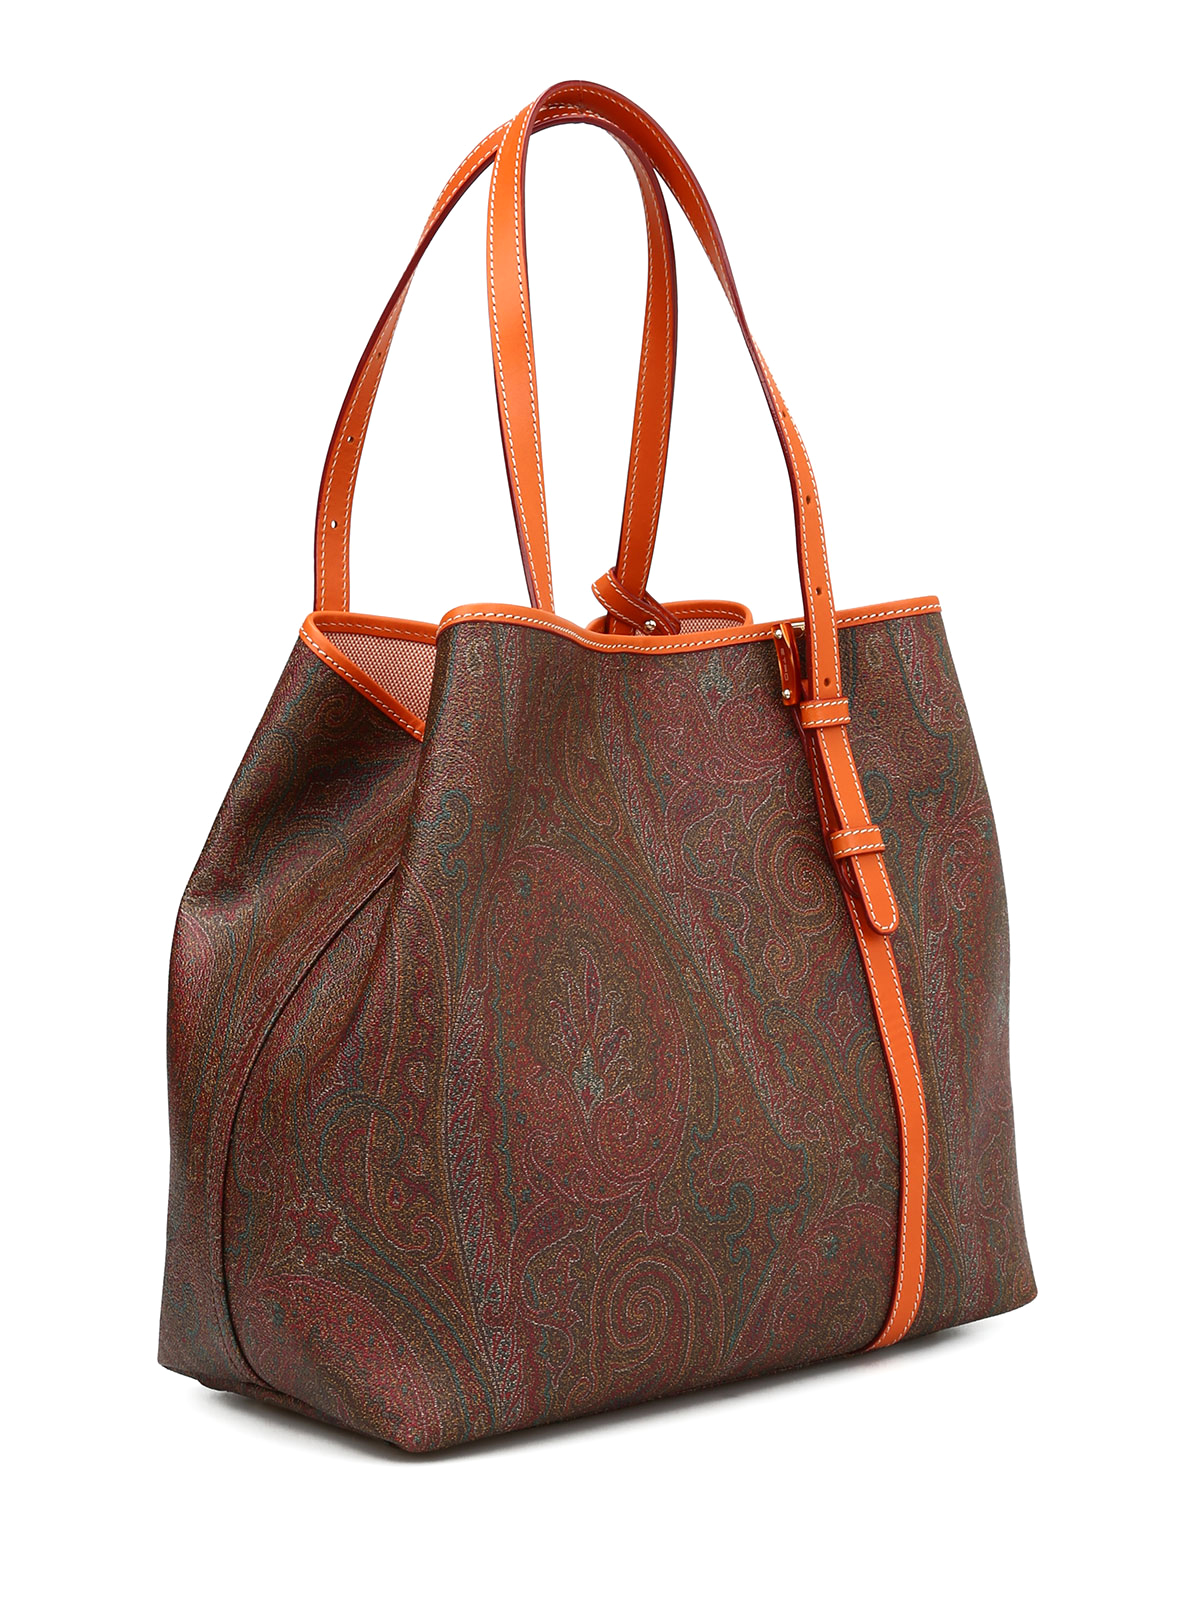 Totes bags Etro - Paisley pattern tote bag - 1H3397107750